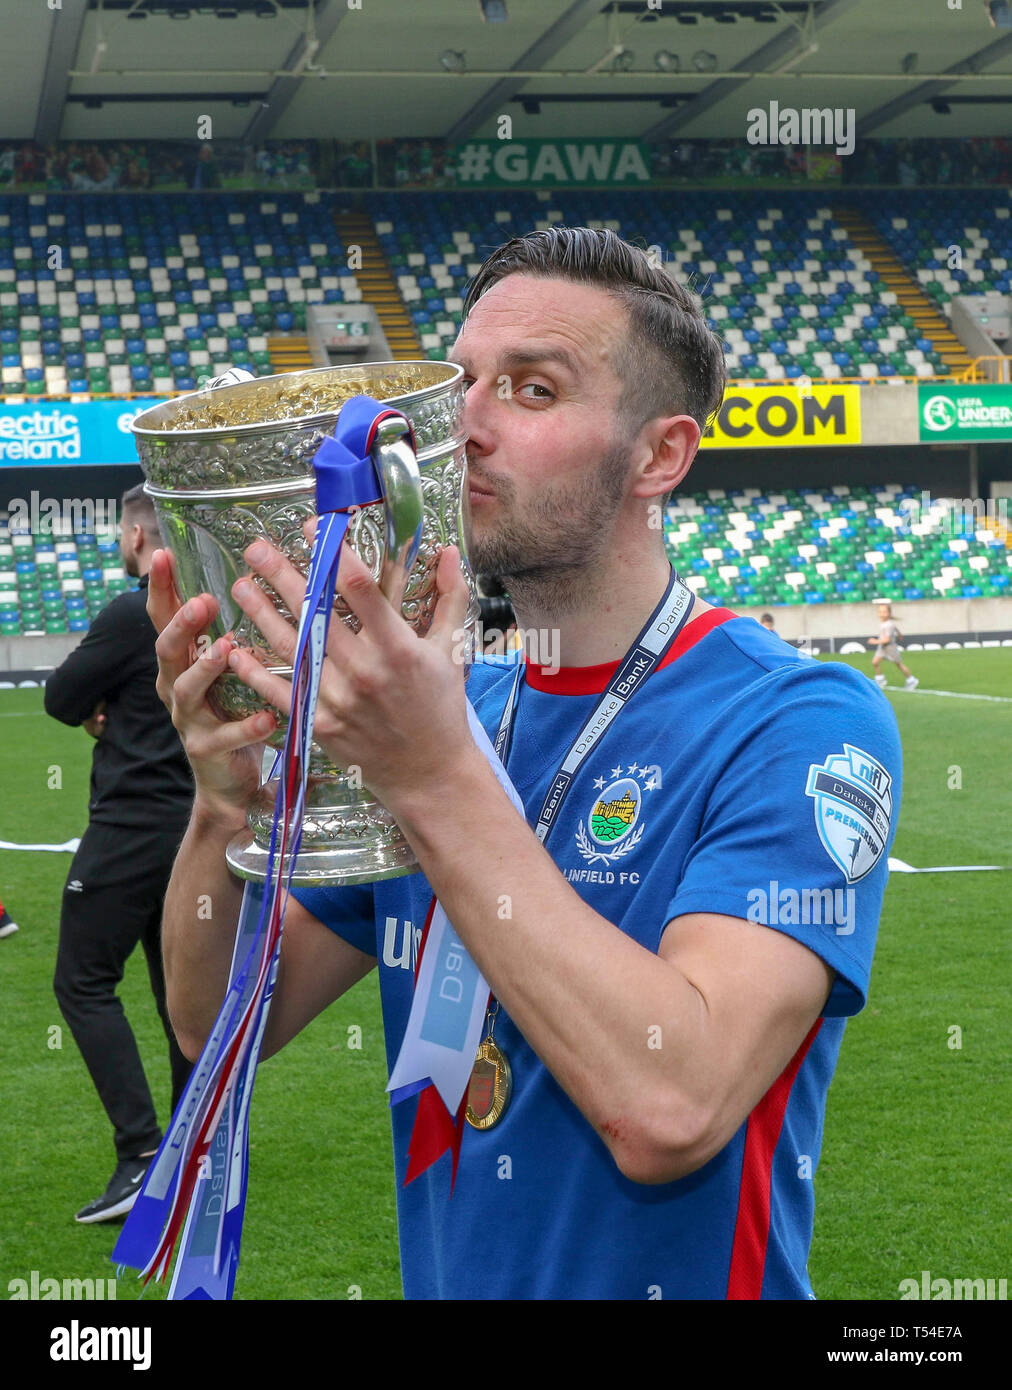 Windsor Park, Belfast, Northern Ireland, UK. 20th Apr, 2019. Linfield, confirmed as Danske Bank Premiership champions last Saturday, lifted the league trophy today after their home league game against Glenavon. The Belfast side, managed by former Northern Ireland international David Healy, have now won the Irish League title on 53 occasions. Andrew Waterworth with the cup. Credit: CAZIMB/Alamy Live News. Stock Photo